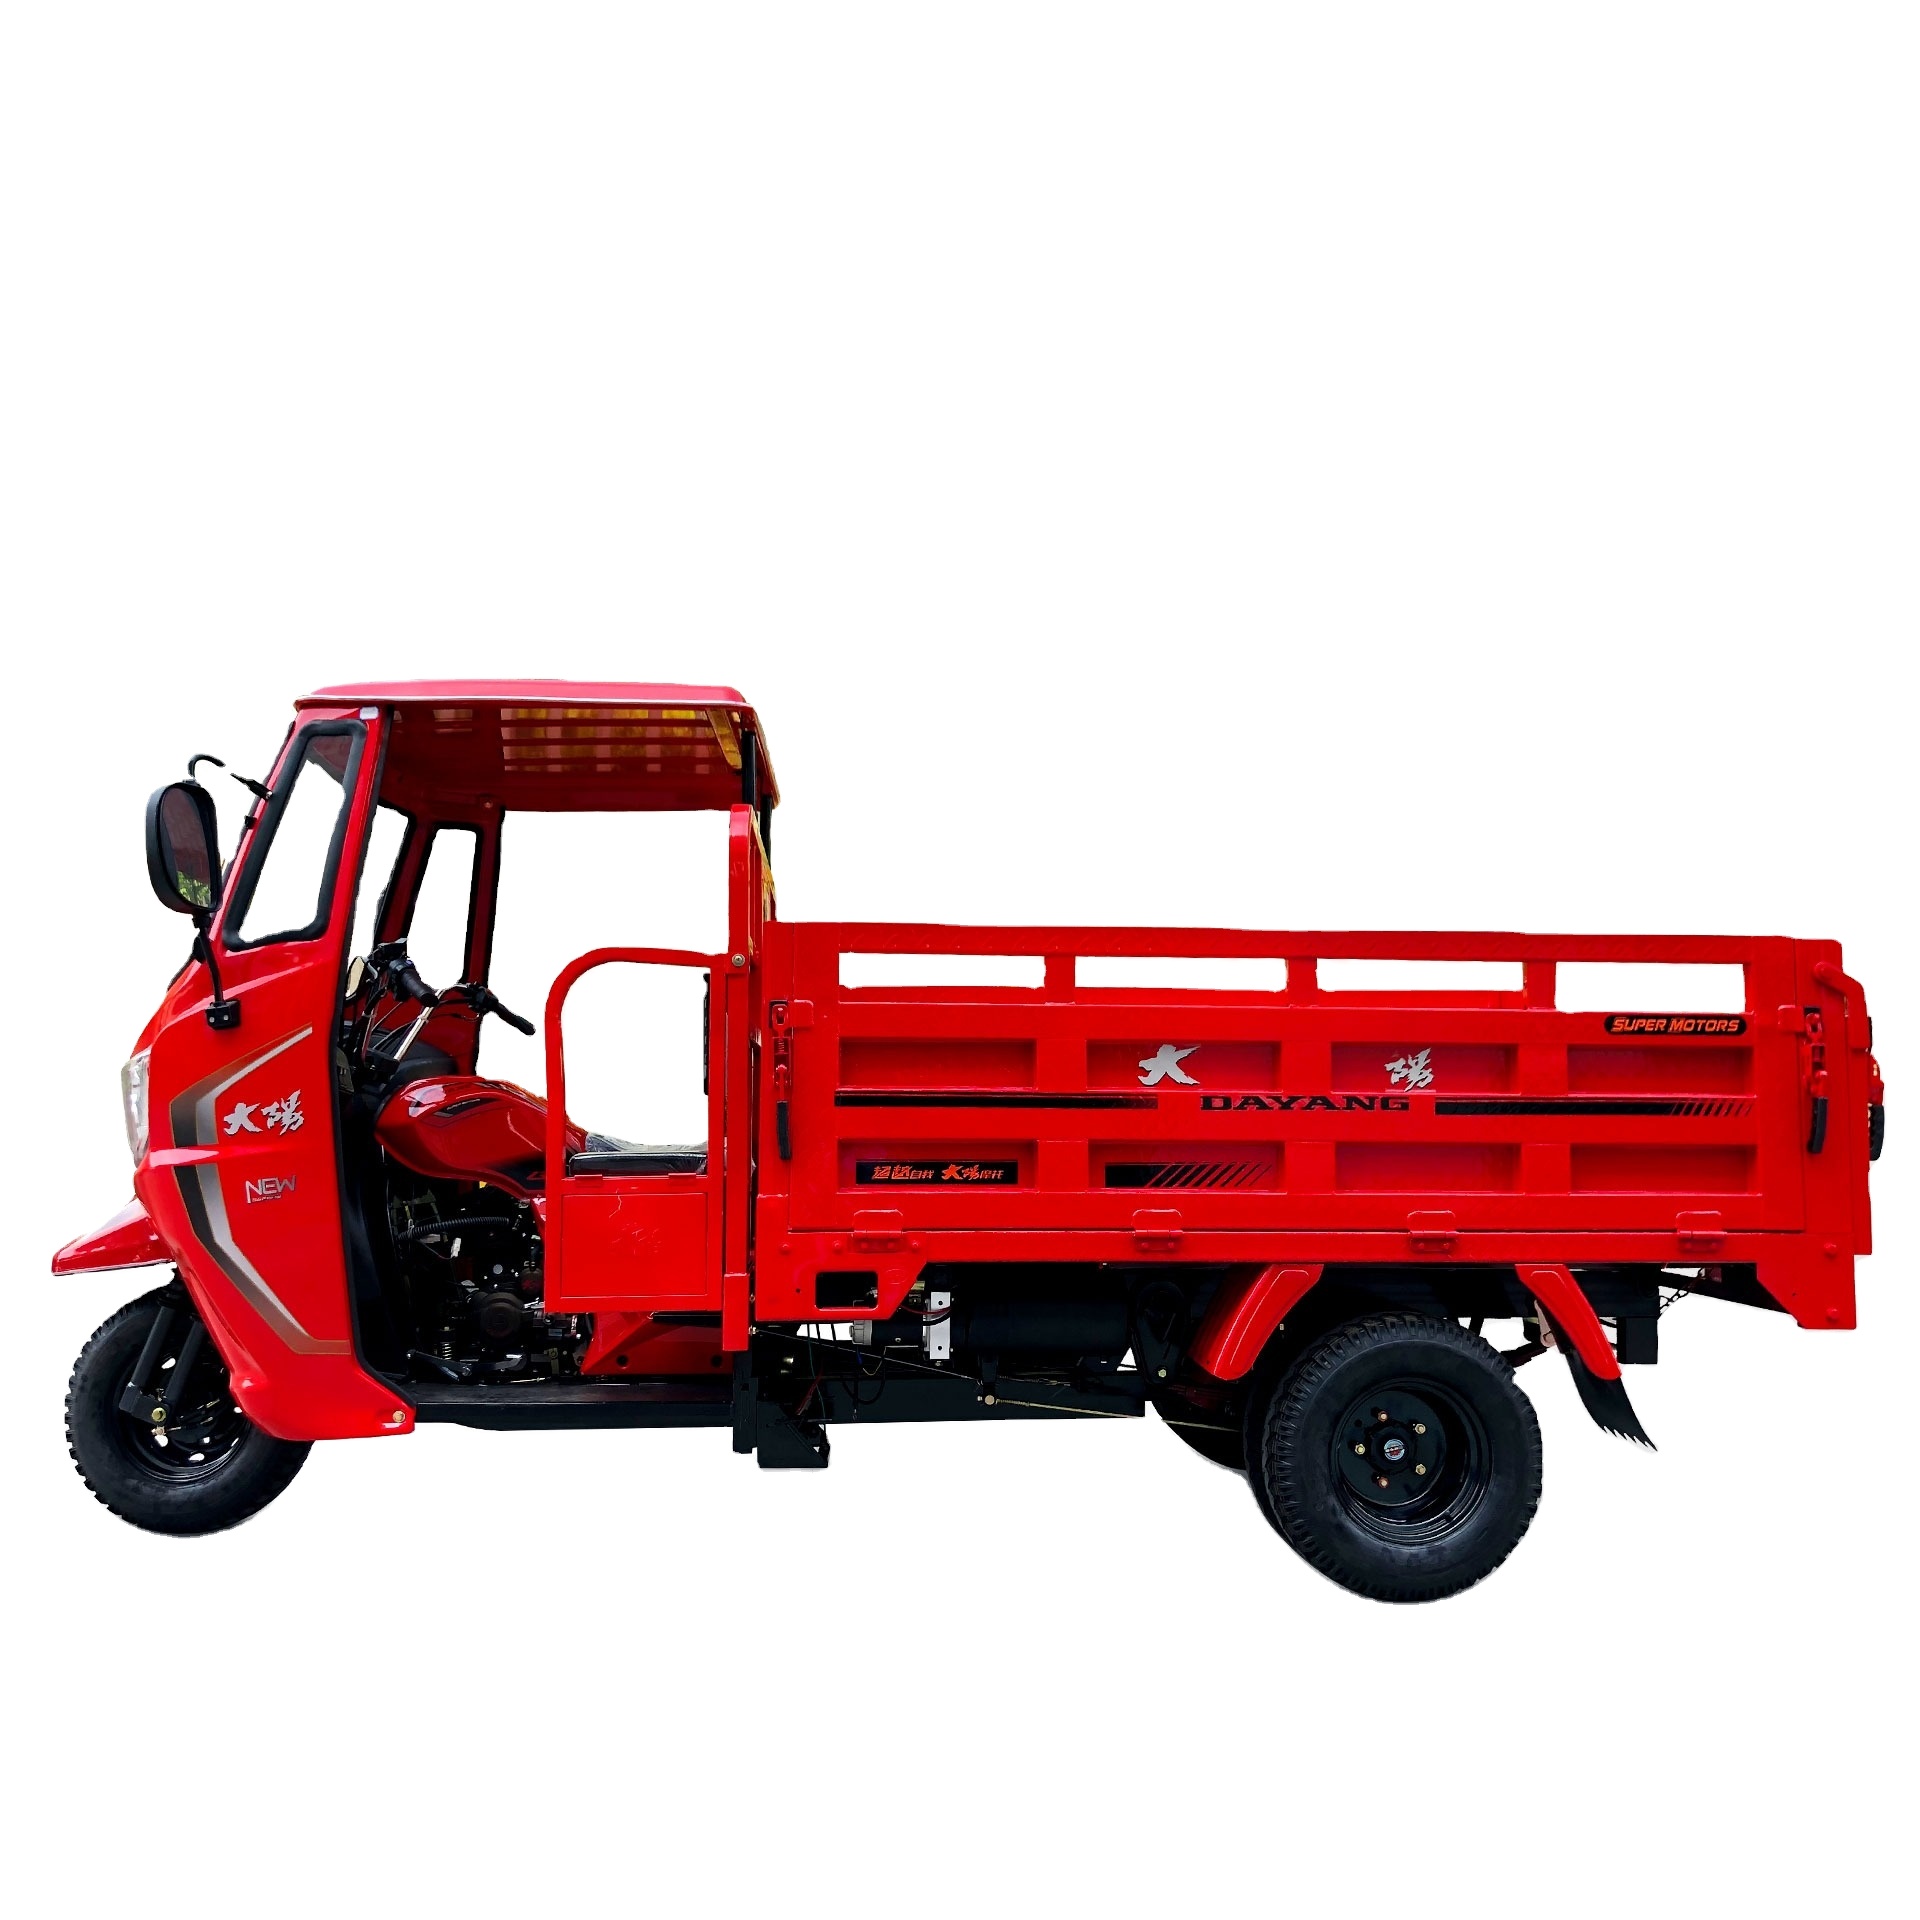 Big carriage fuel domestic and agricultural harga cabin motor tricycle motorized tricycles strong